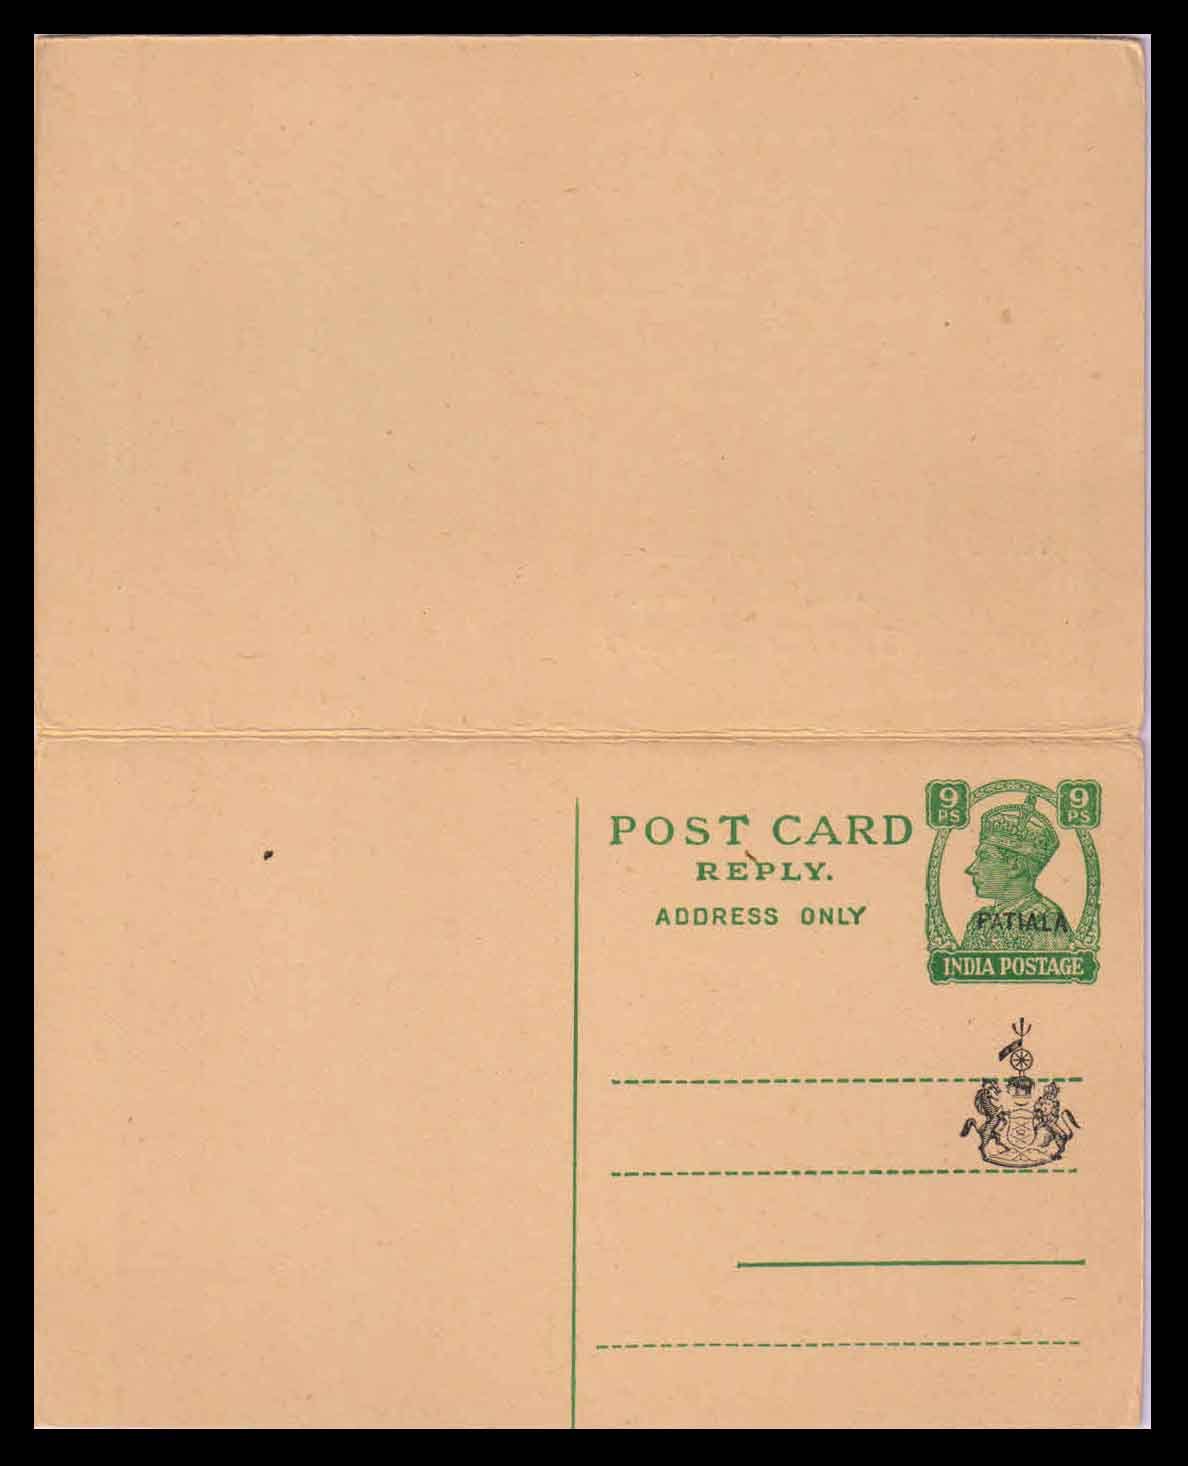 PATIALA STATE Post Card, 9Ps. King George VI, Unused Reply Post Card